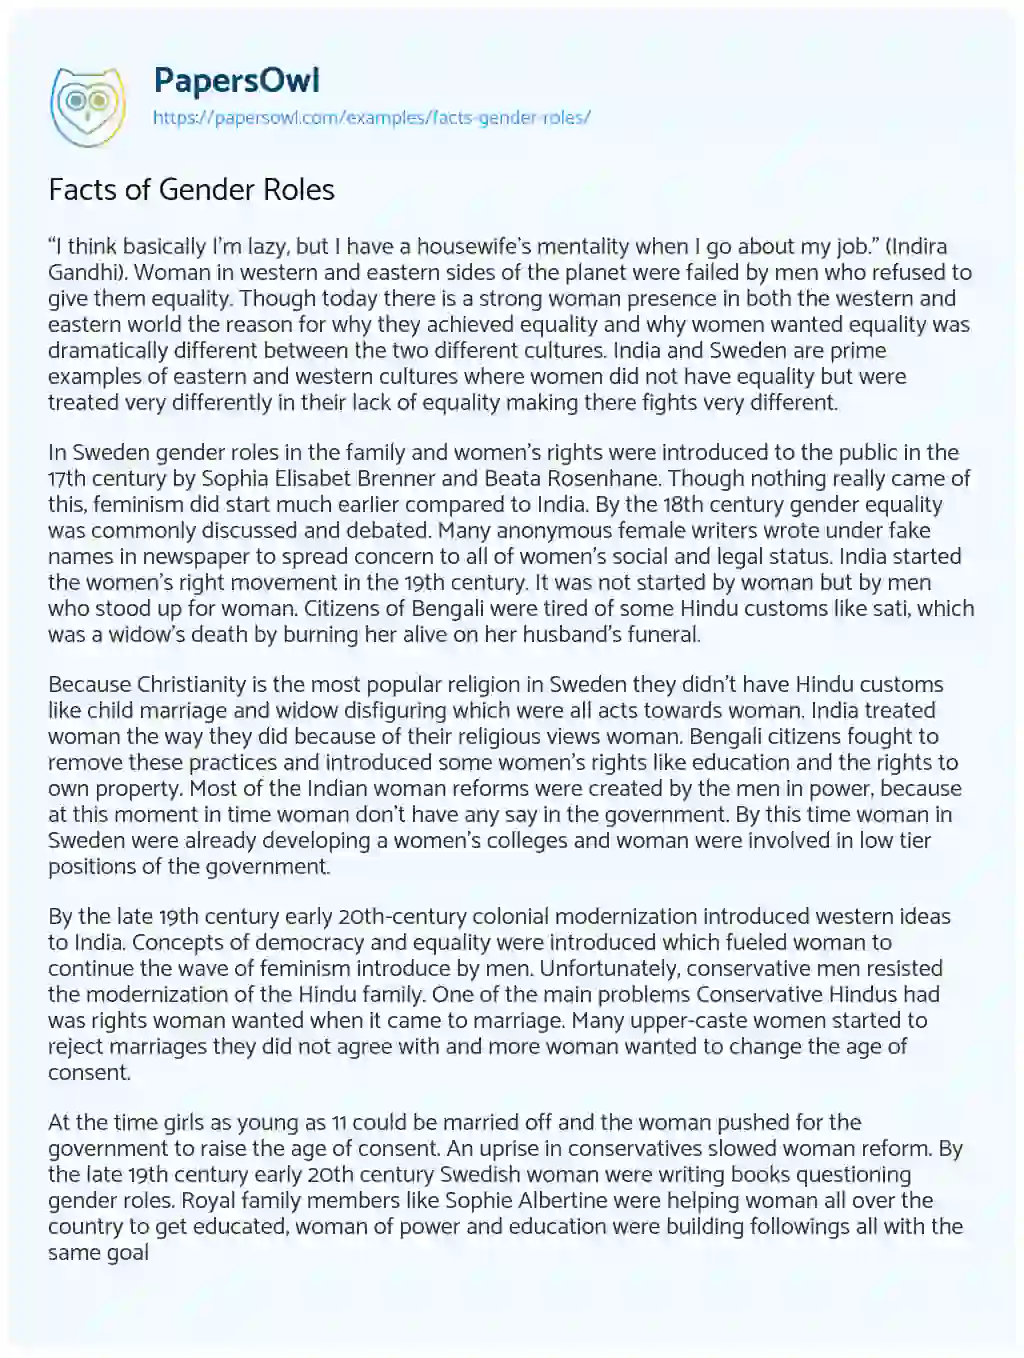 Facts of Gender Roles essay